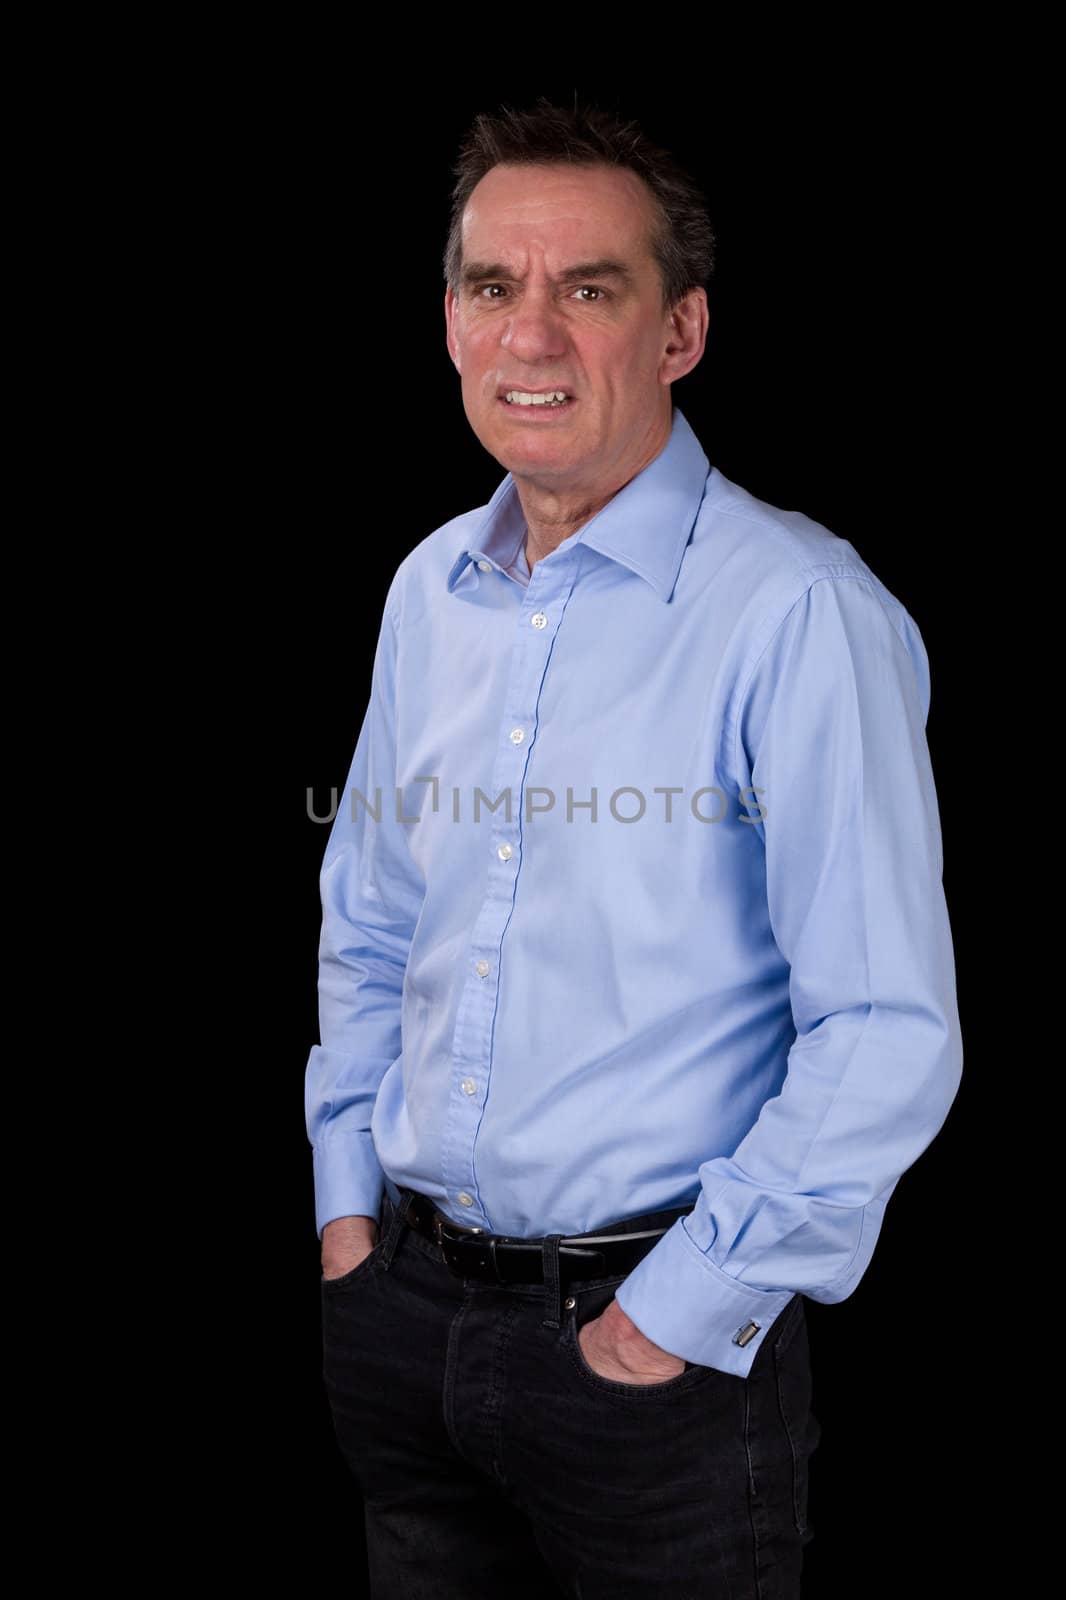 Angry Frowning Scowling Middle Age Business Man Hands in Pockets Black Background